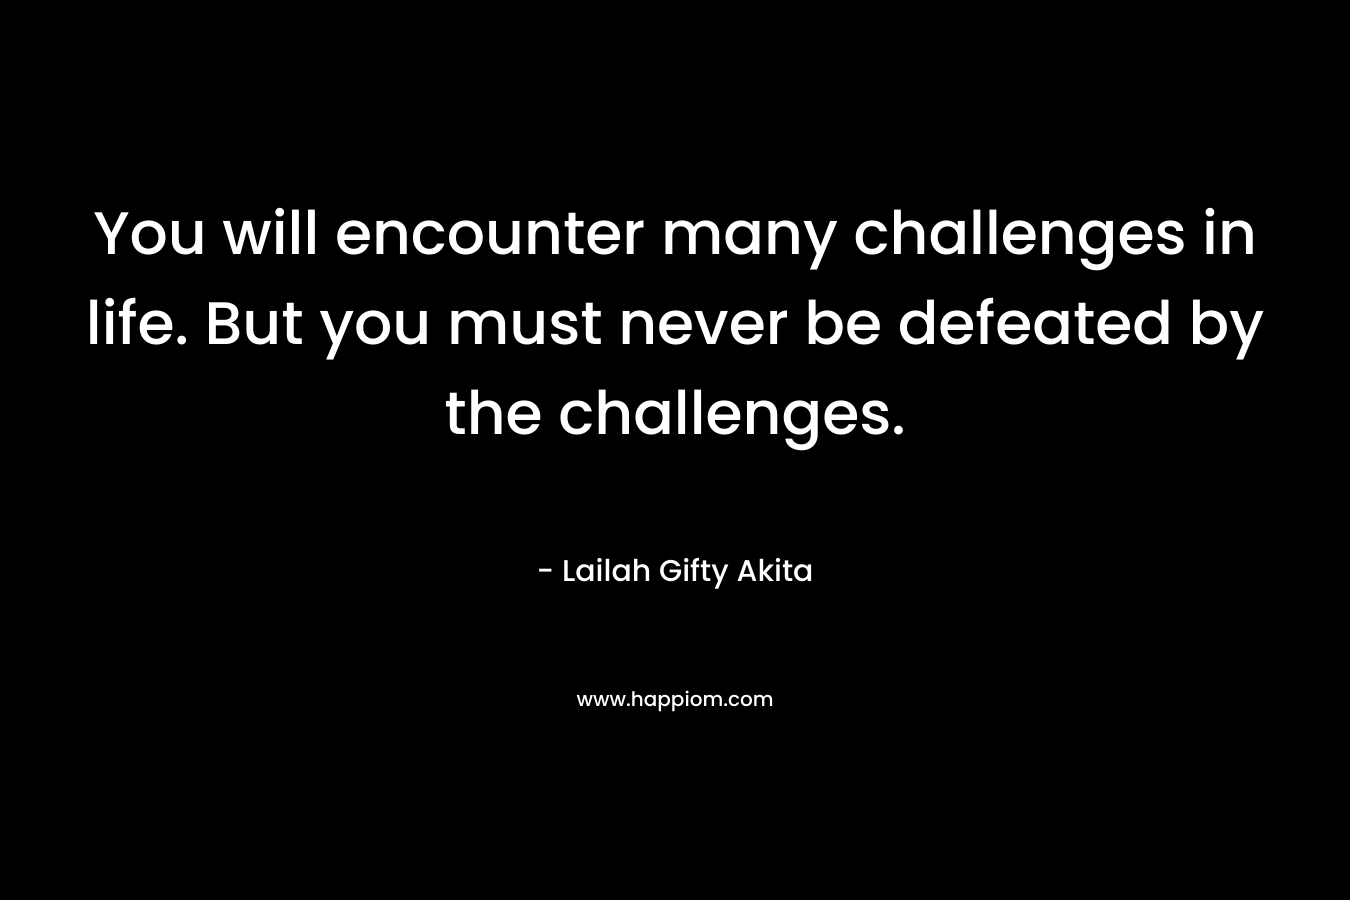 You will encounter many challenges in life. But you must never be defeated by the challenges.